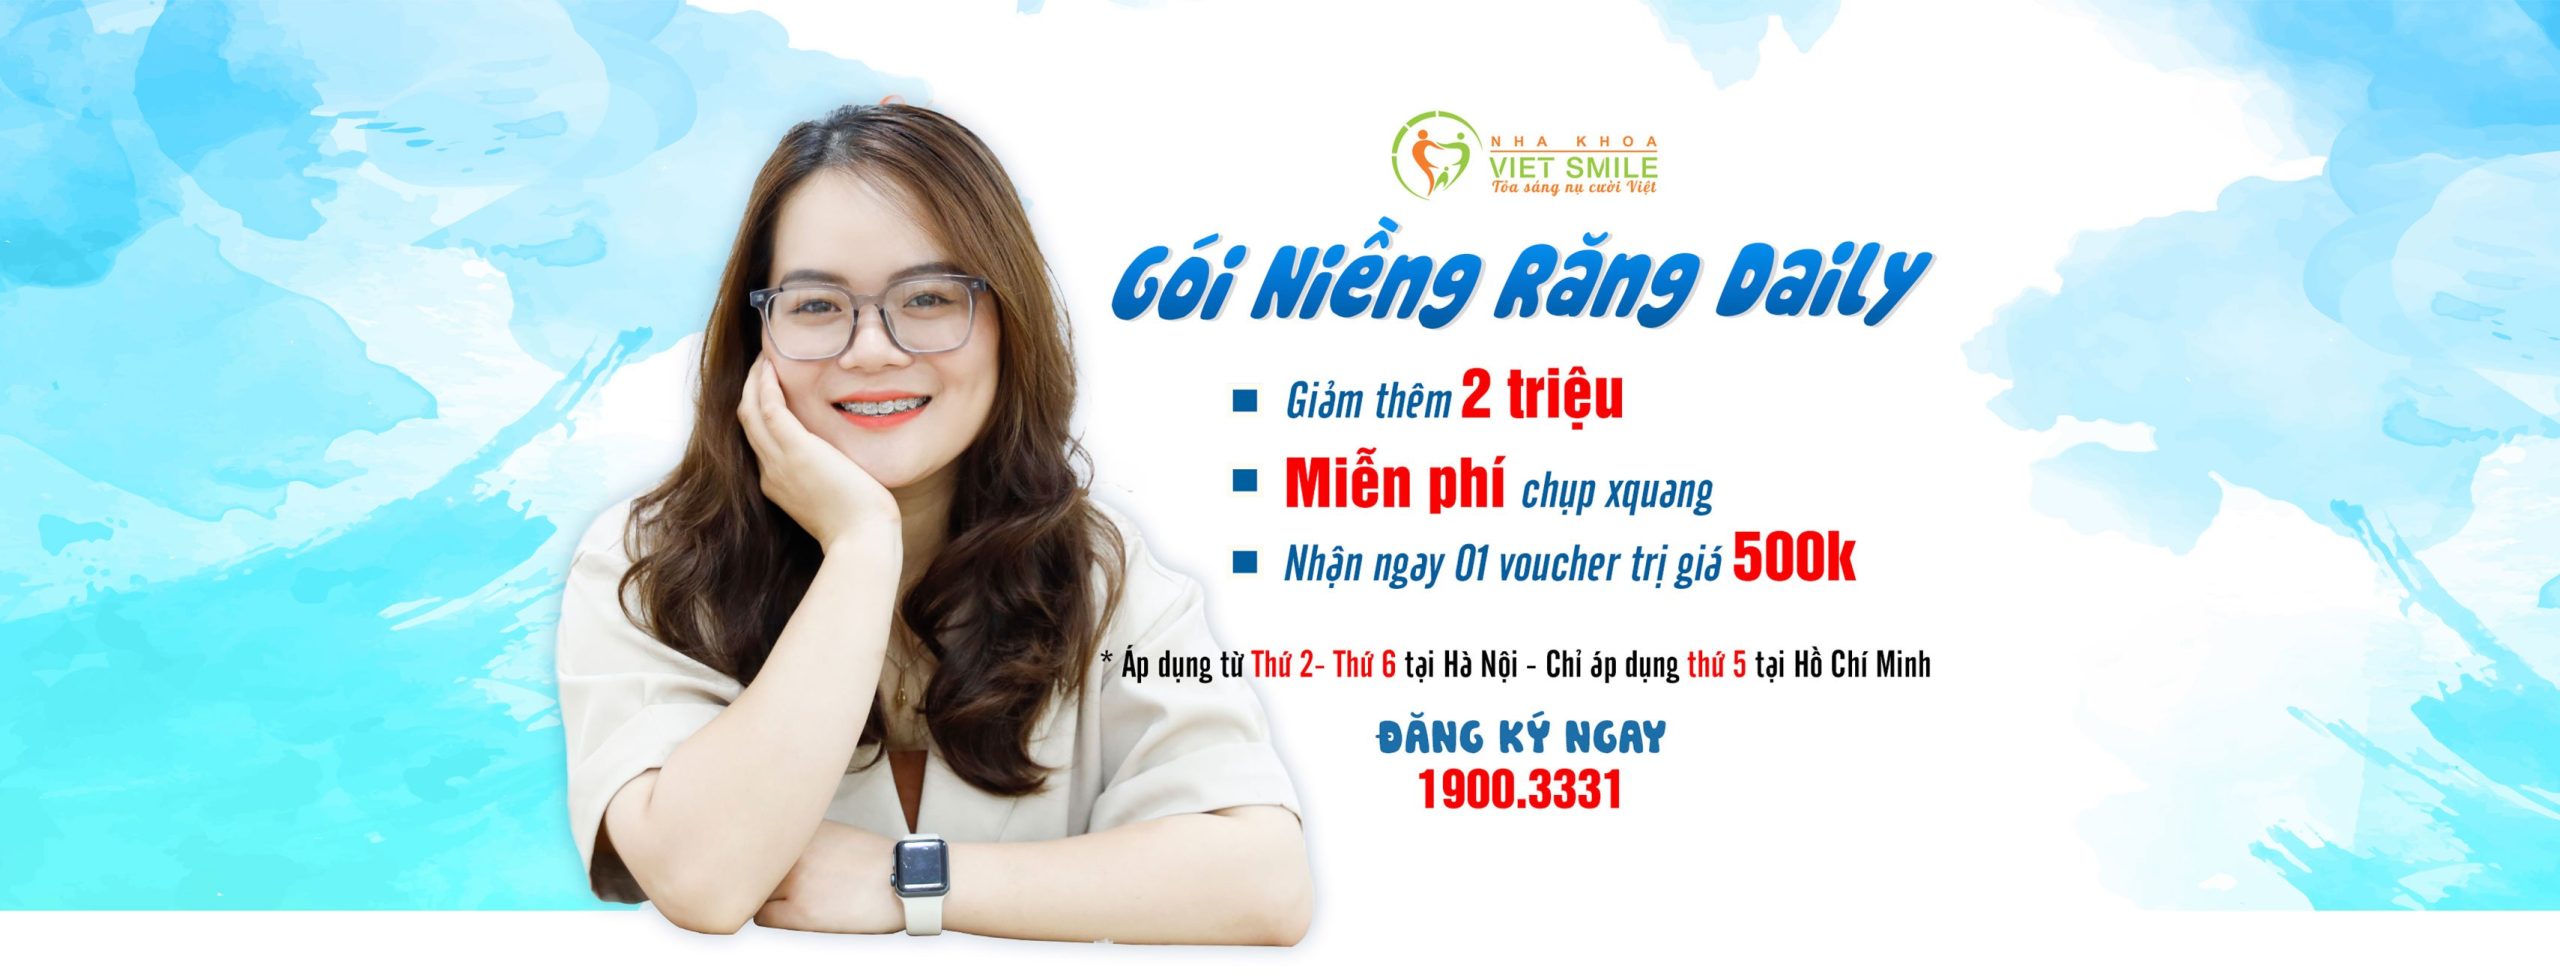 Vietsmile web daily t9 scaled